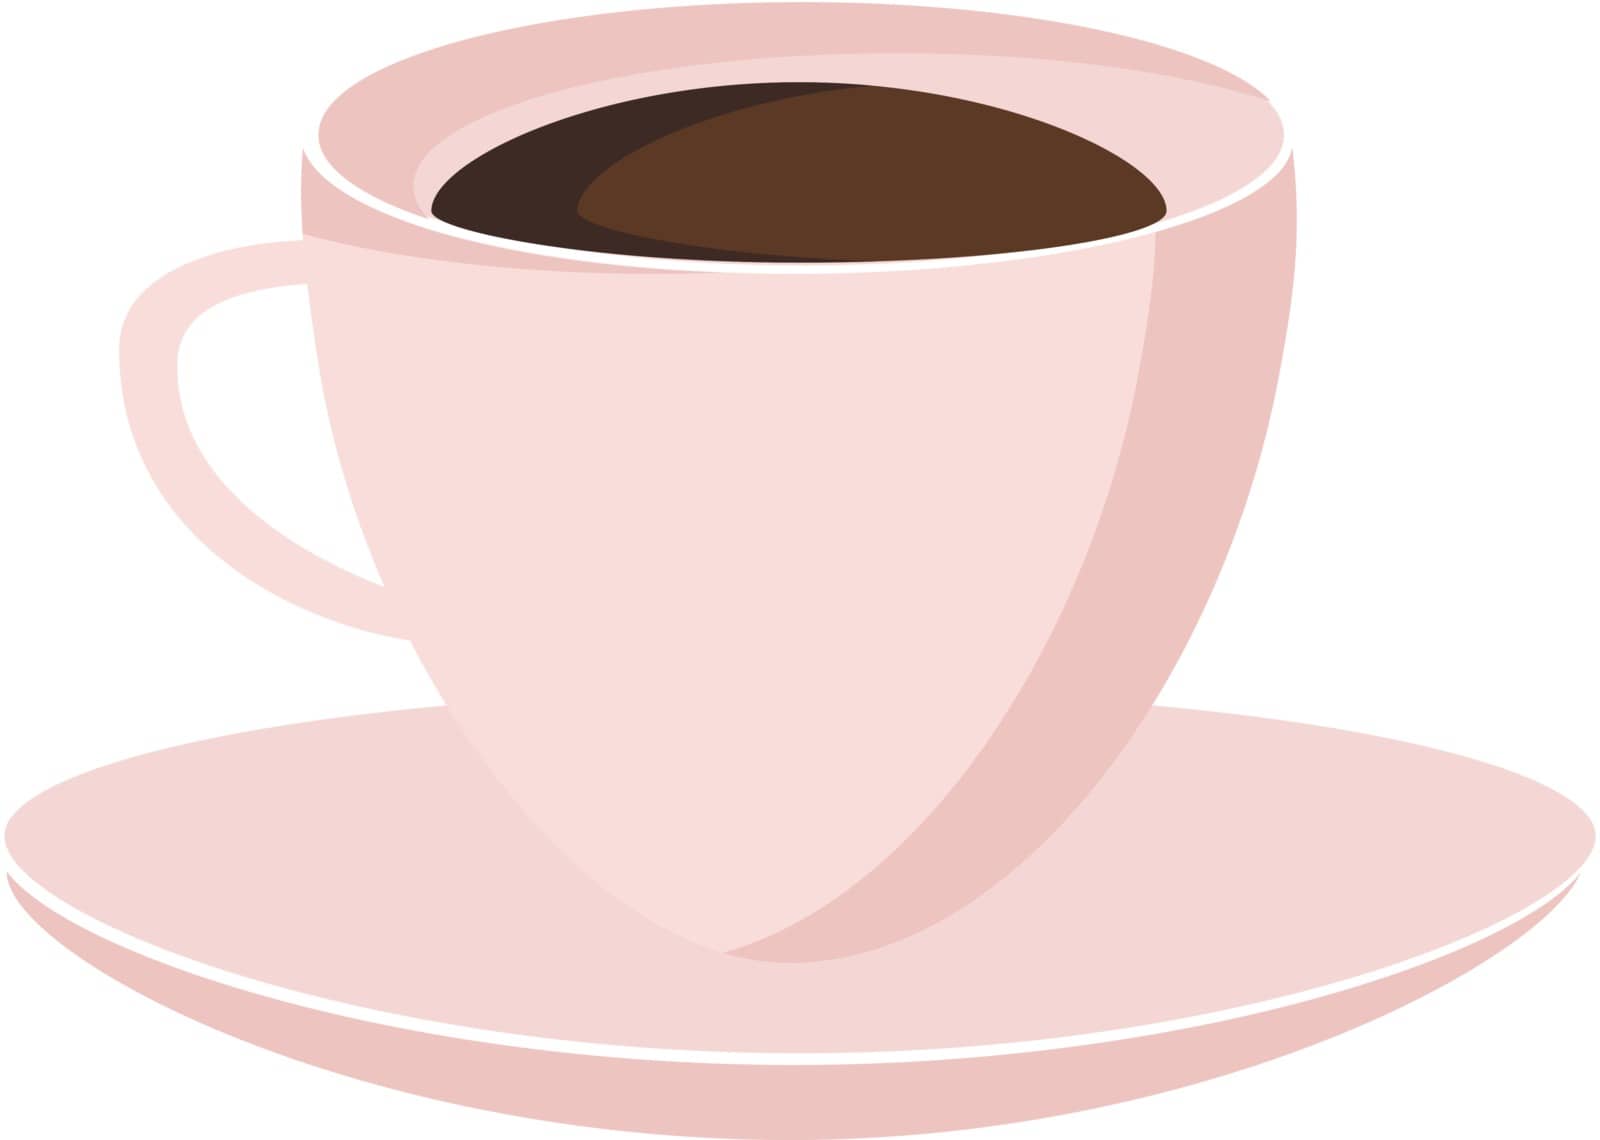 Hot beverage is being served in a cup plate dish vector color drawing or illustration 